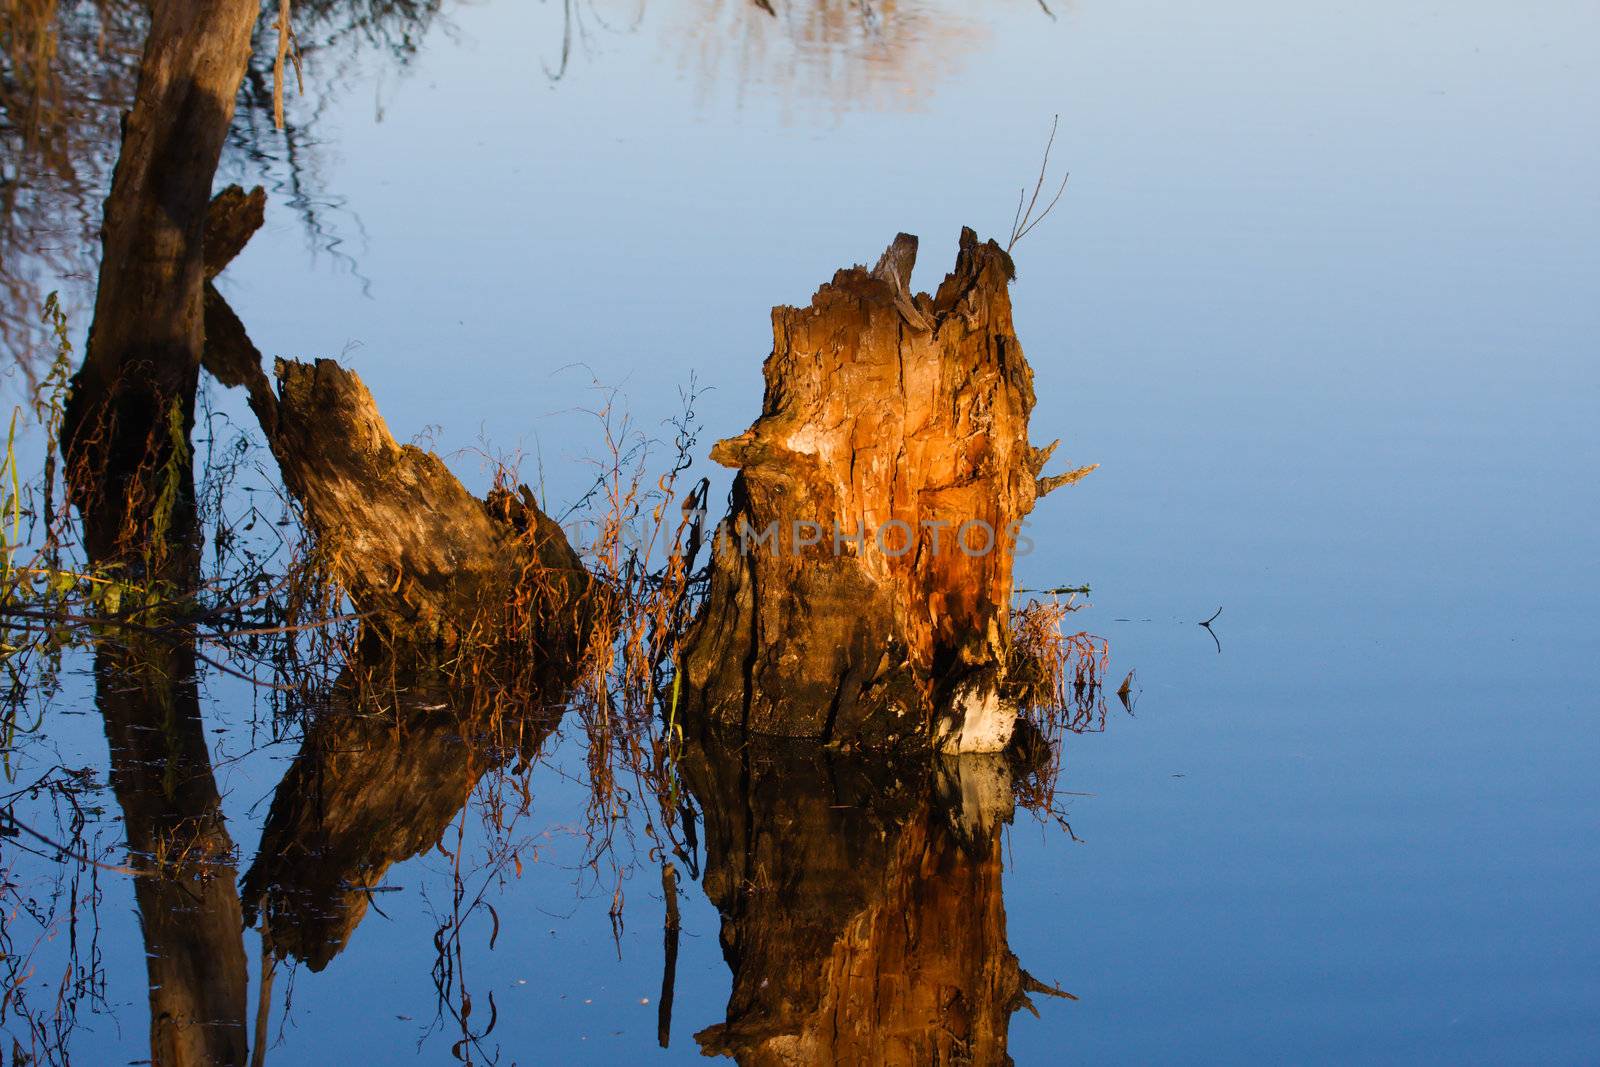 Tree Stump rising out of the water in a Swamp.